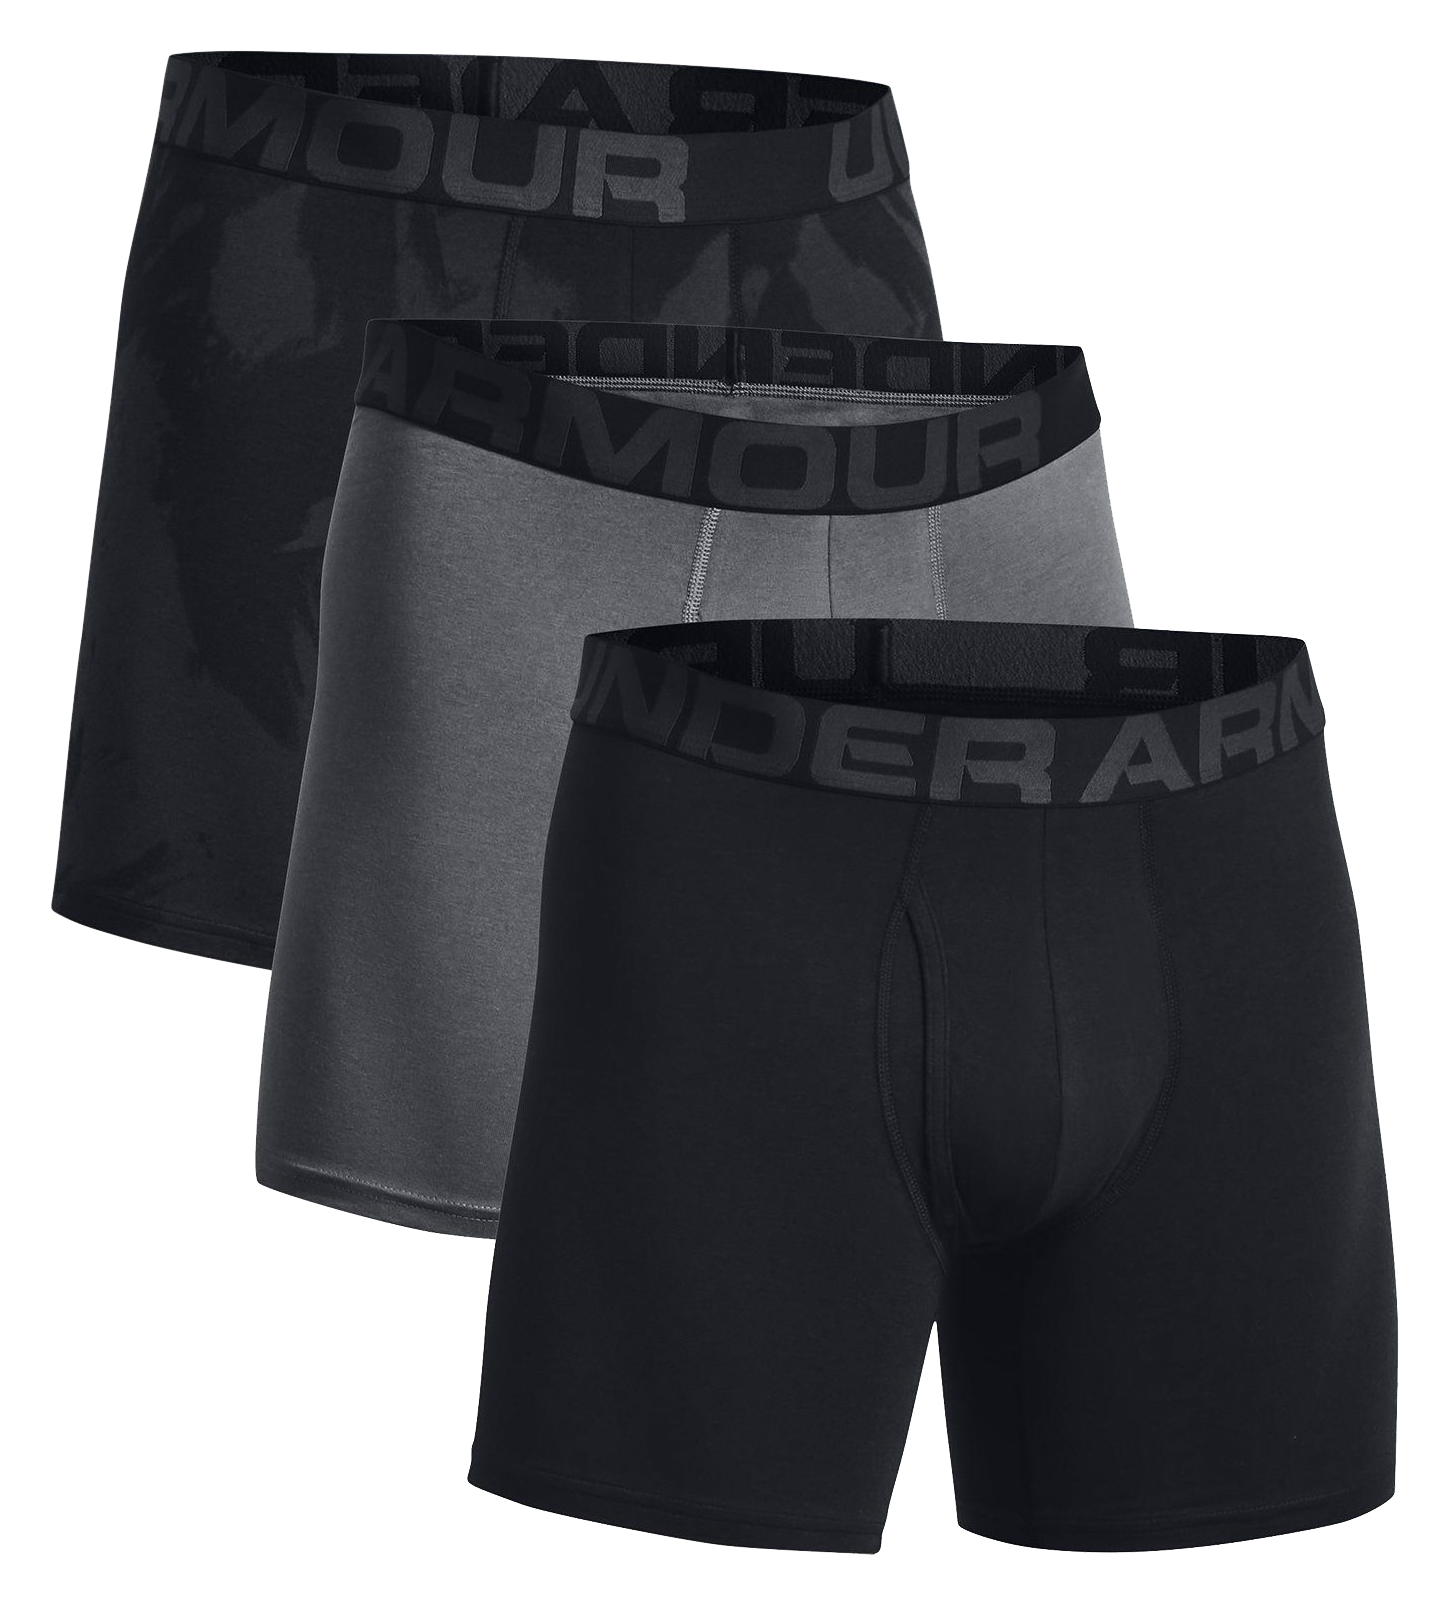 Under Armour Charged Cotton 6"" Patterned Boxerjock for Men - Black/Pitch Gray/Jet Gray - S